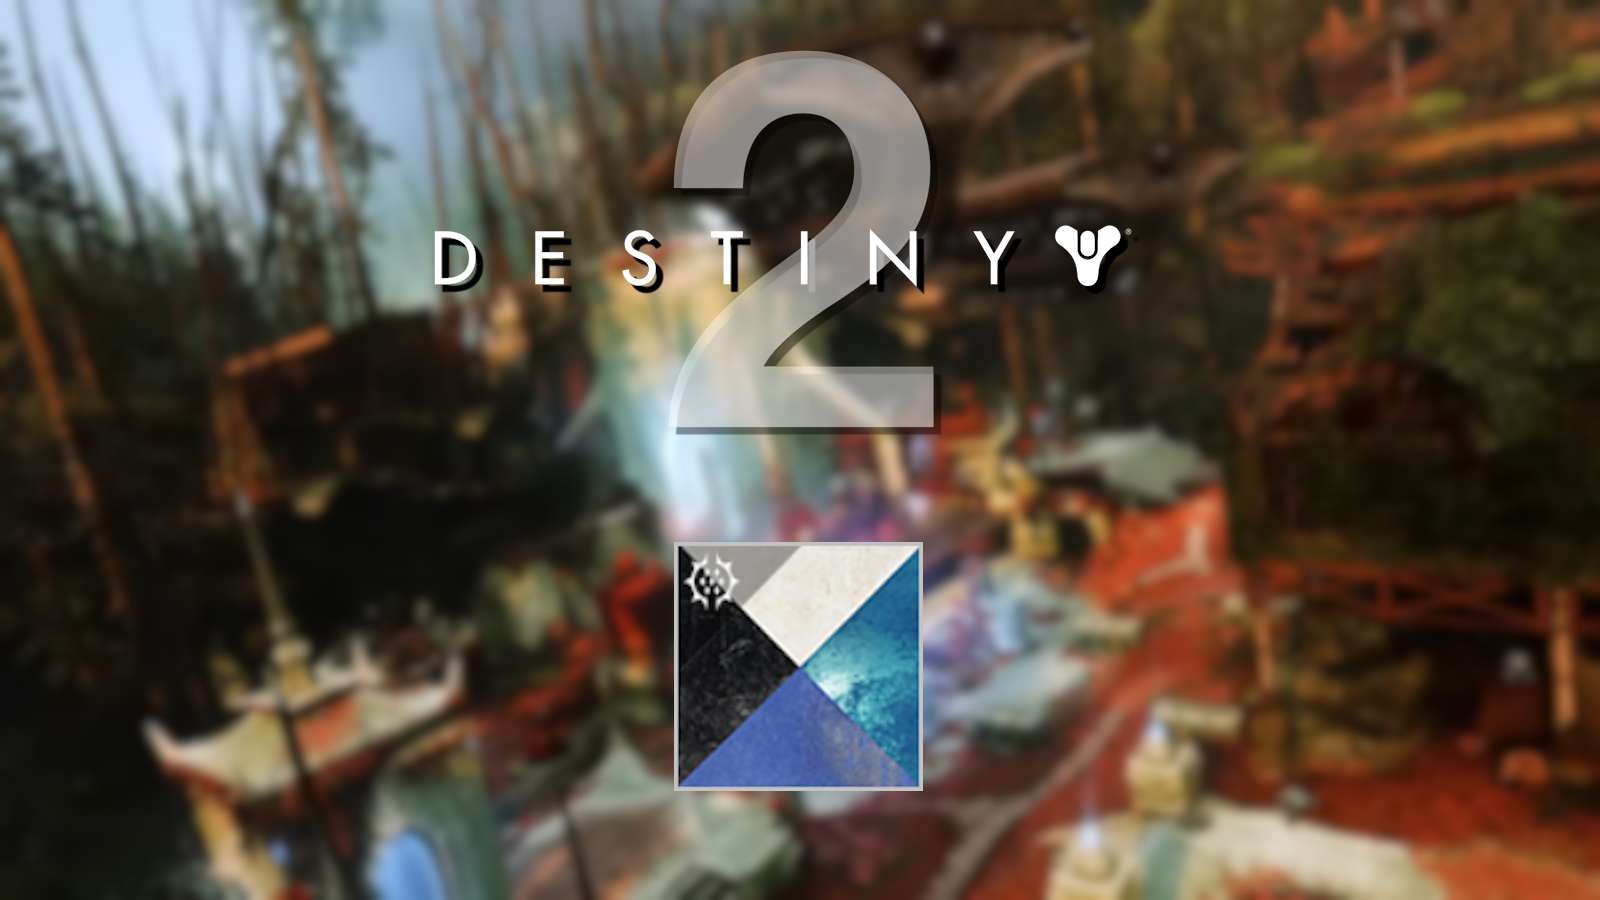 Destiny 2 logo in front of Season 18 trailer image with silver only Ego Malign shader in foreground.